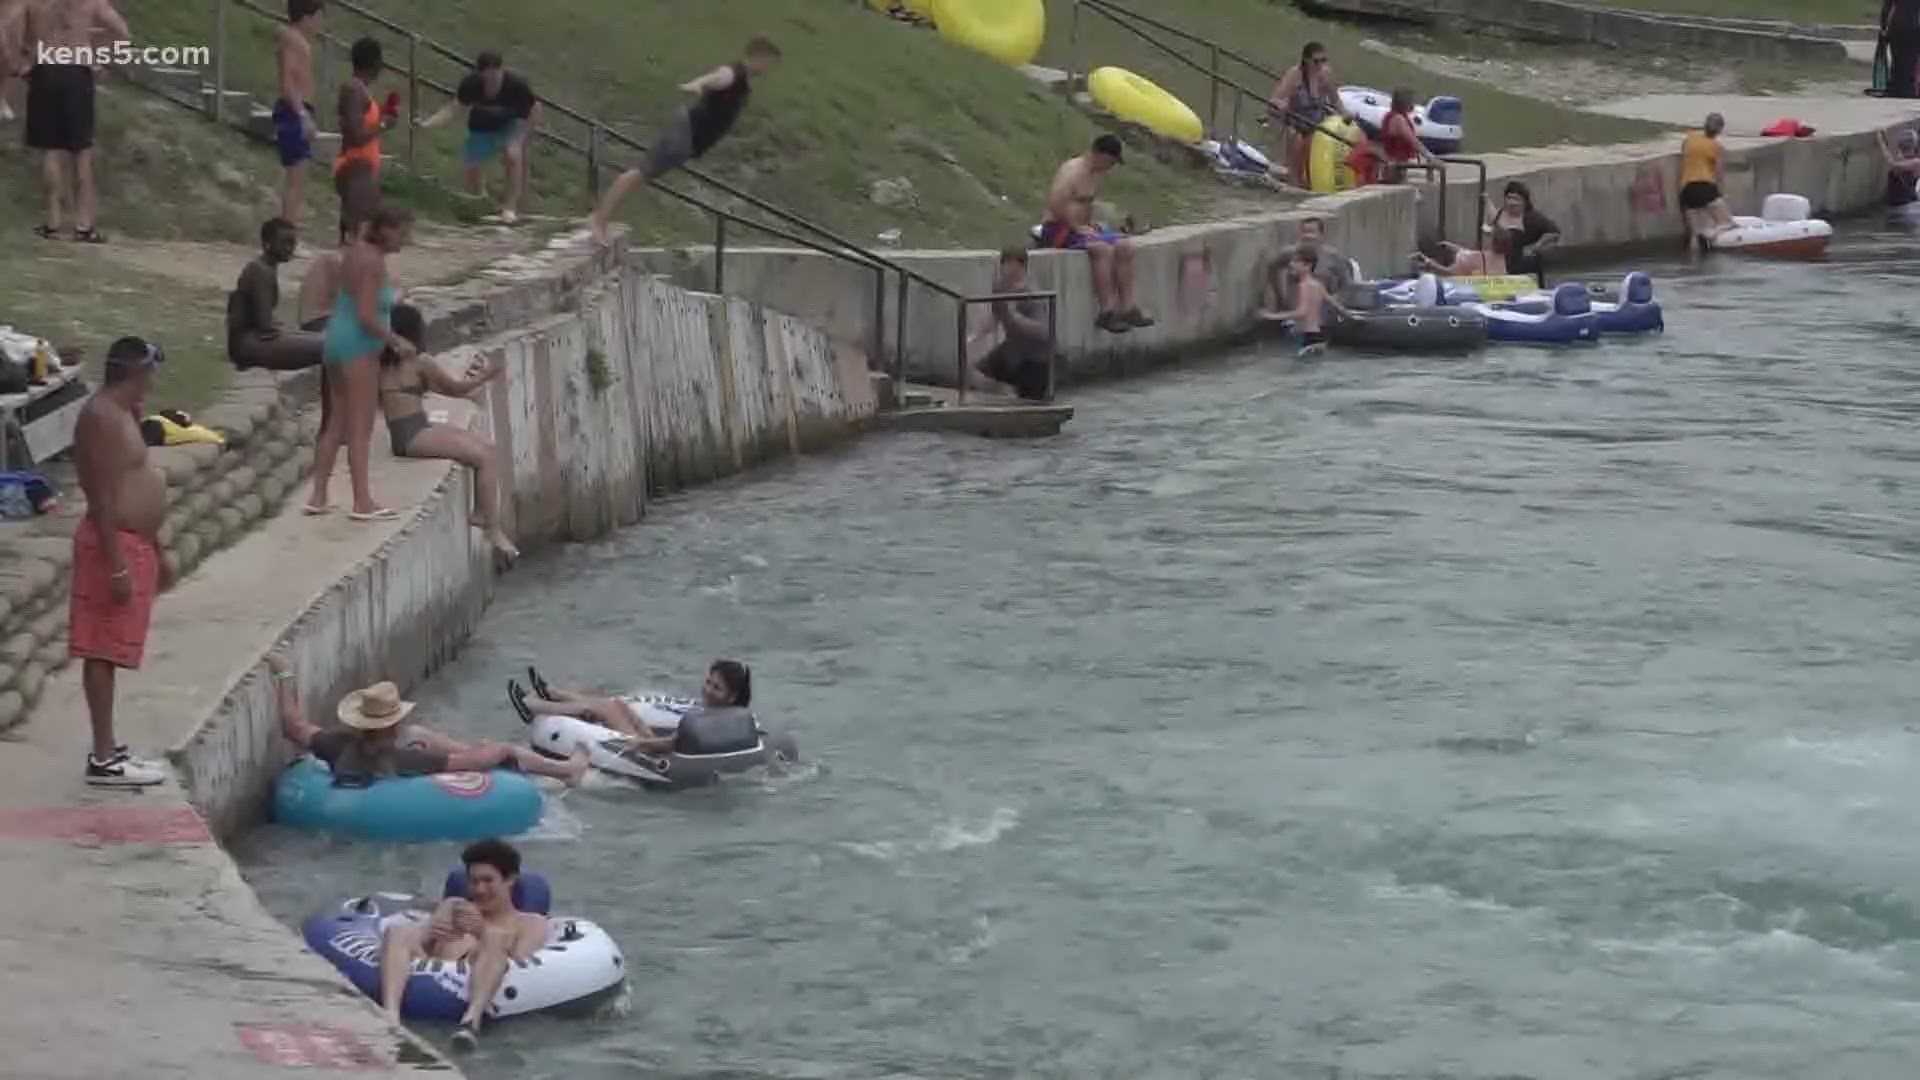 Tubing companies have been shut down following an order from Gov. Abbott and several popular water access points have been closed by local governments.